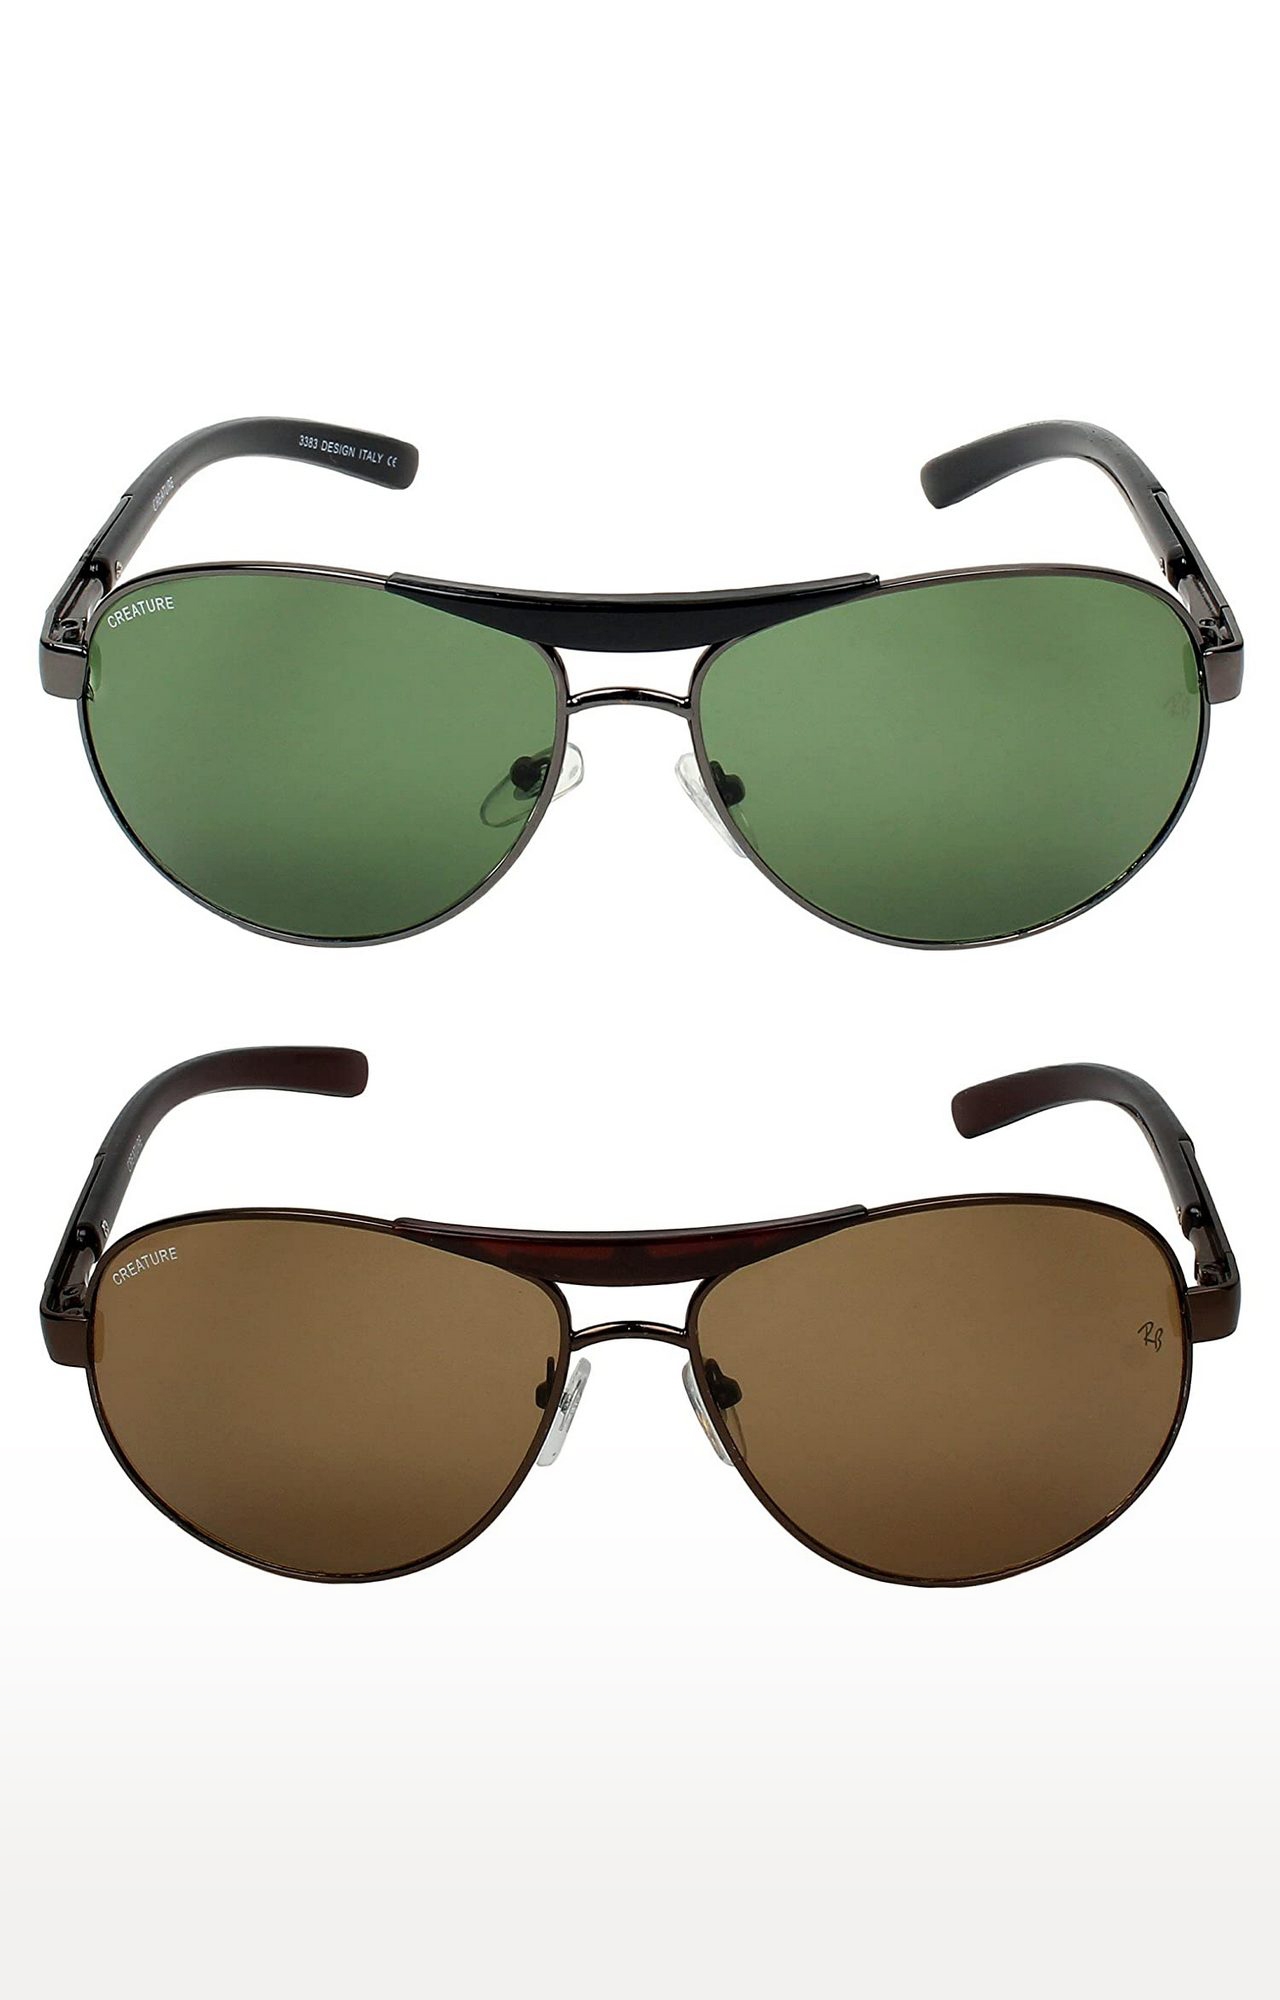 CREATURE | CREATURE Green & Brown Aviator Sunglasses Combo with UV Protection (Lens-Green & Brown|Frame-Black & Brown) 0